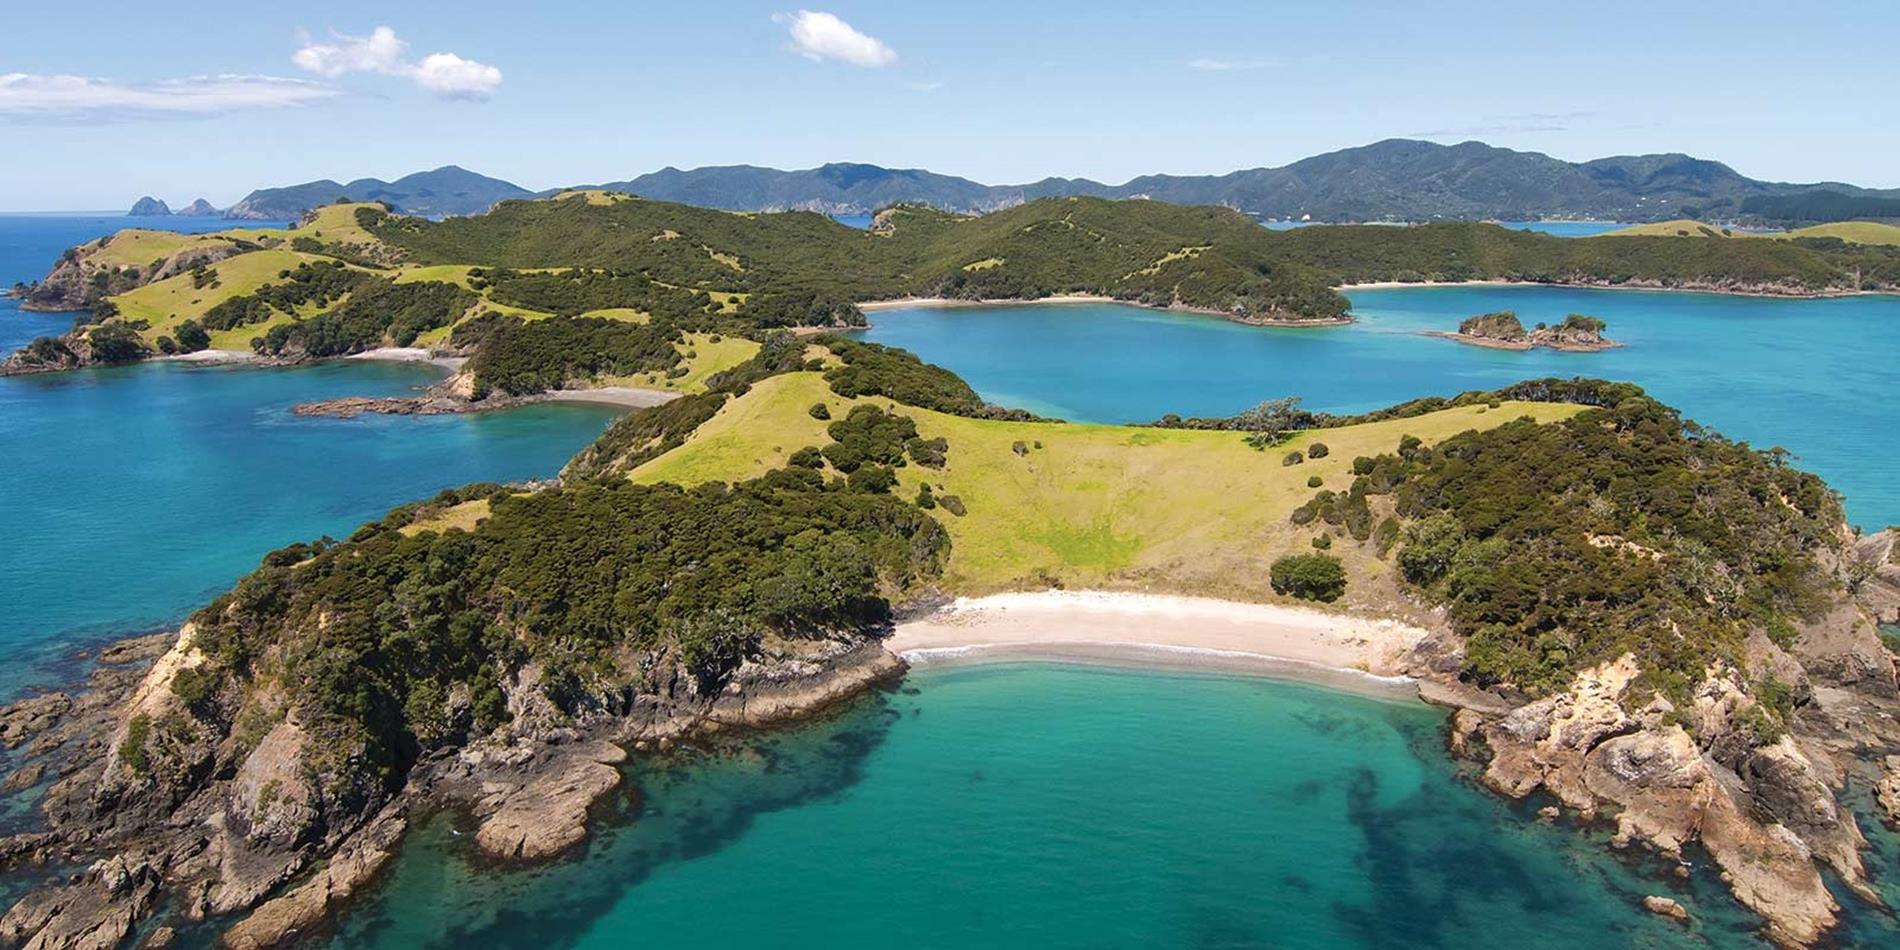 Aerial view across tranquil blue water and islands dotted along the coast, New Zealand